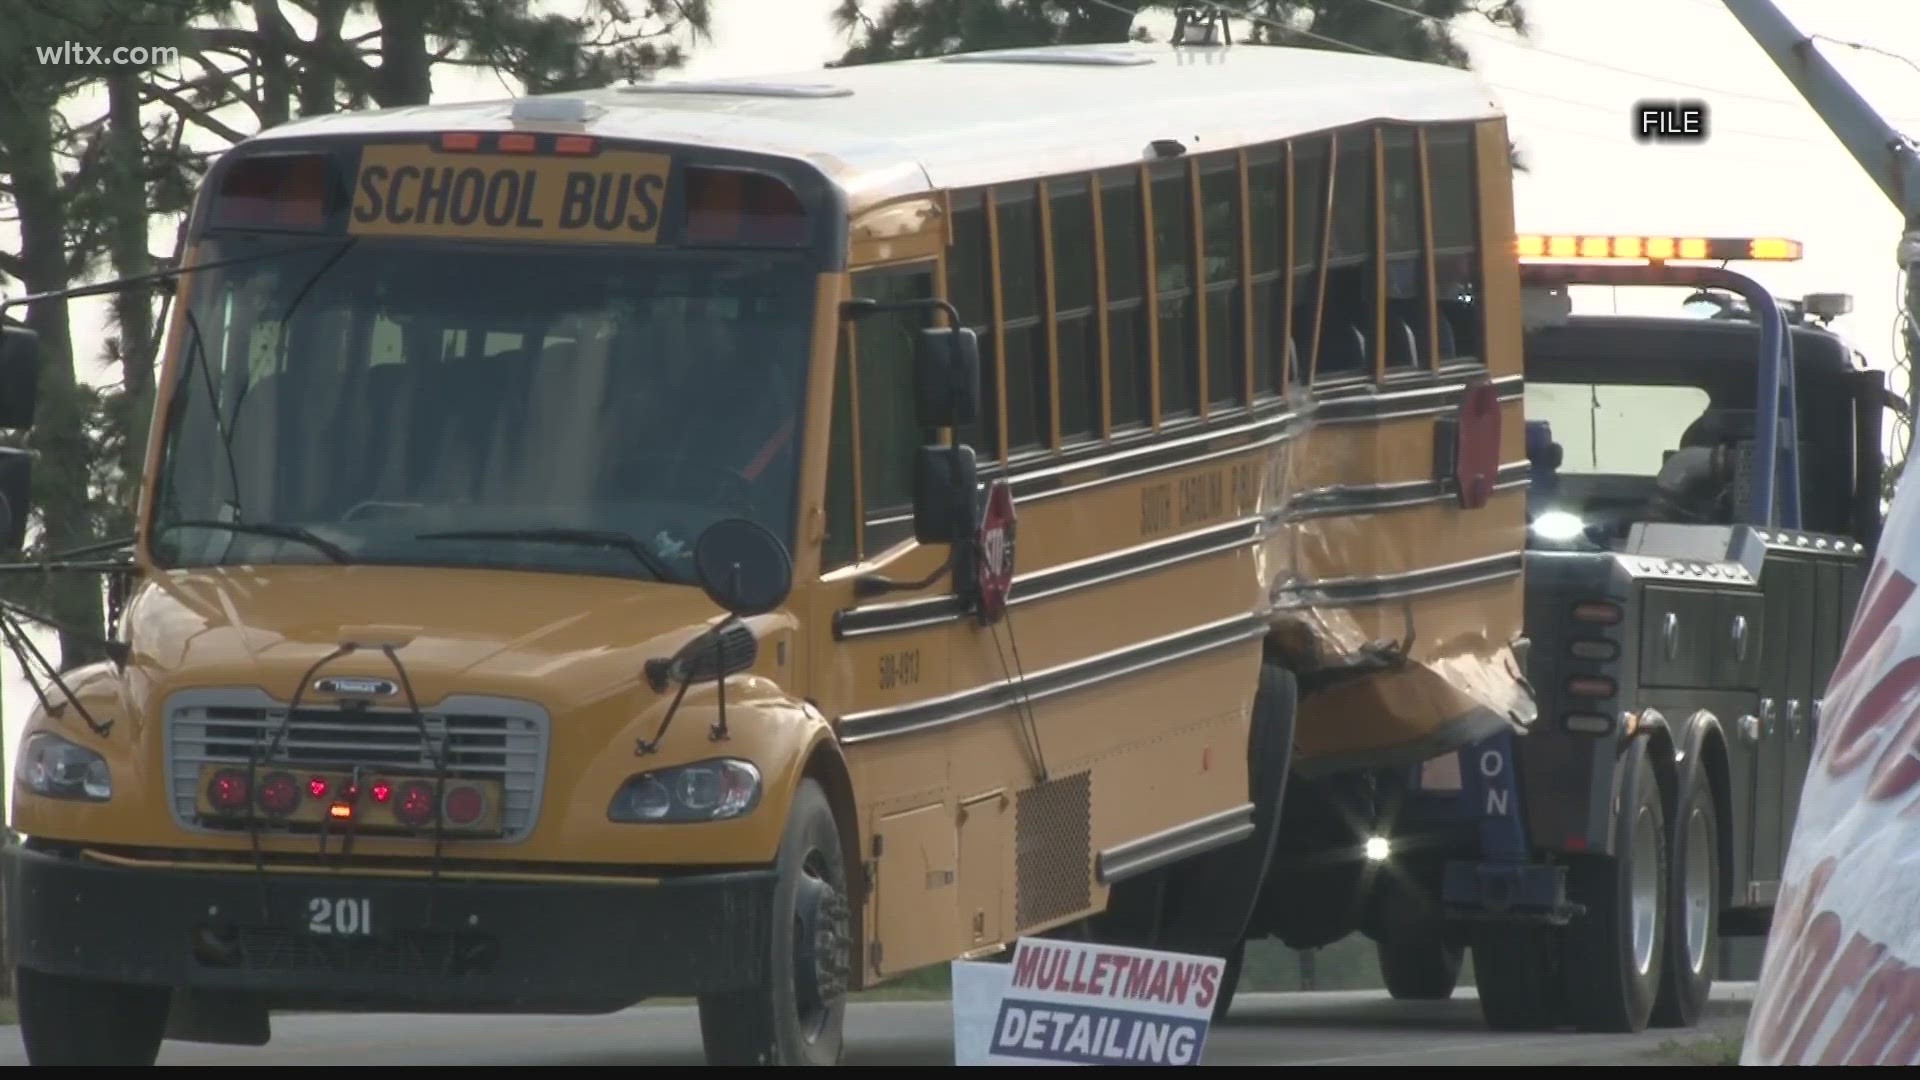 A total of 17 students were taken to the hospital after a bus crash in South Carolina.